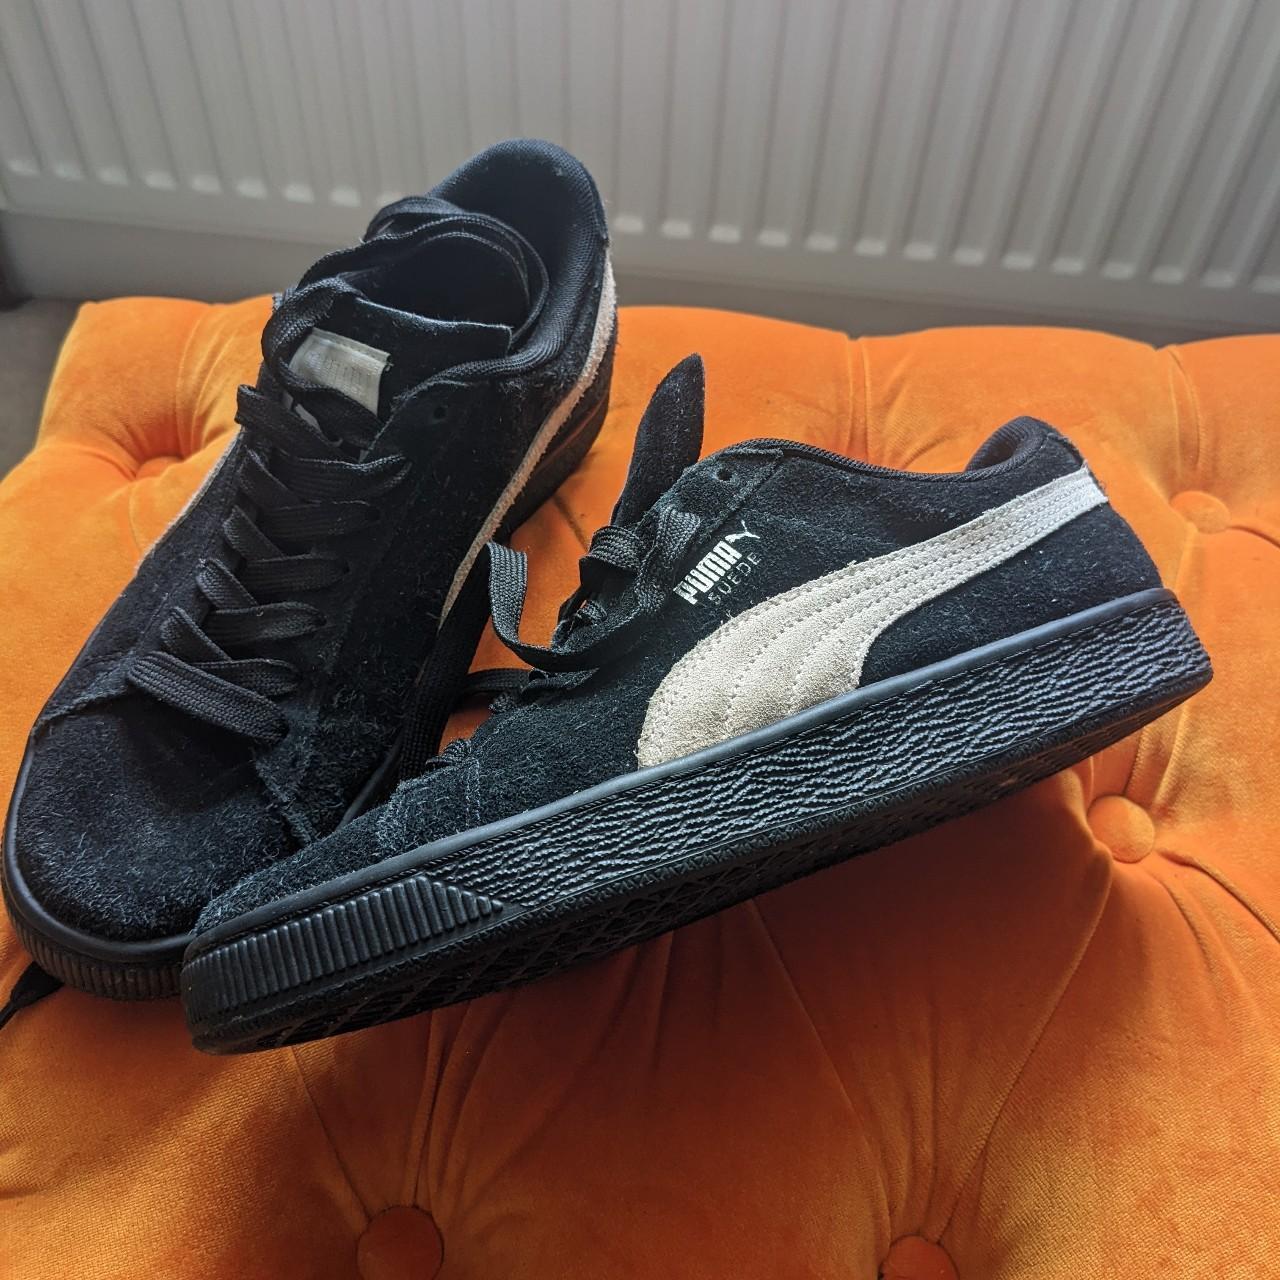 Black suede PUMA trainers size 6 Black suede and... - Depop